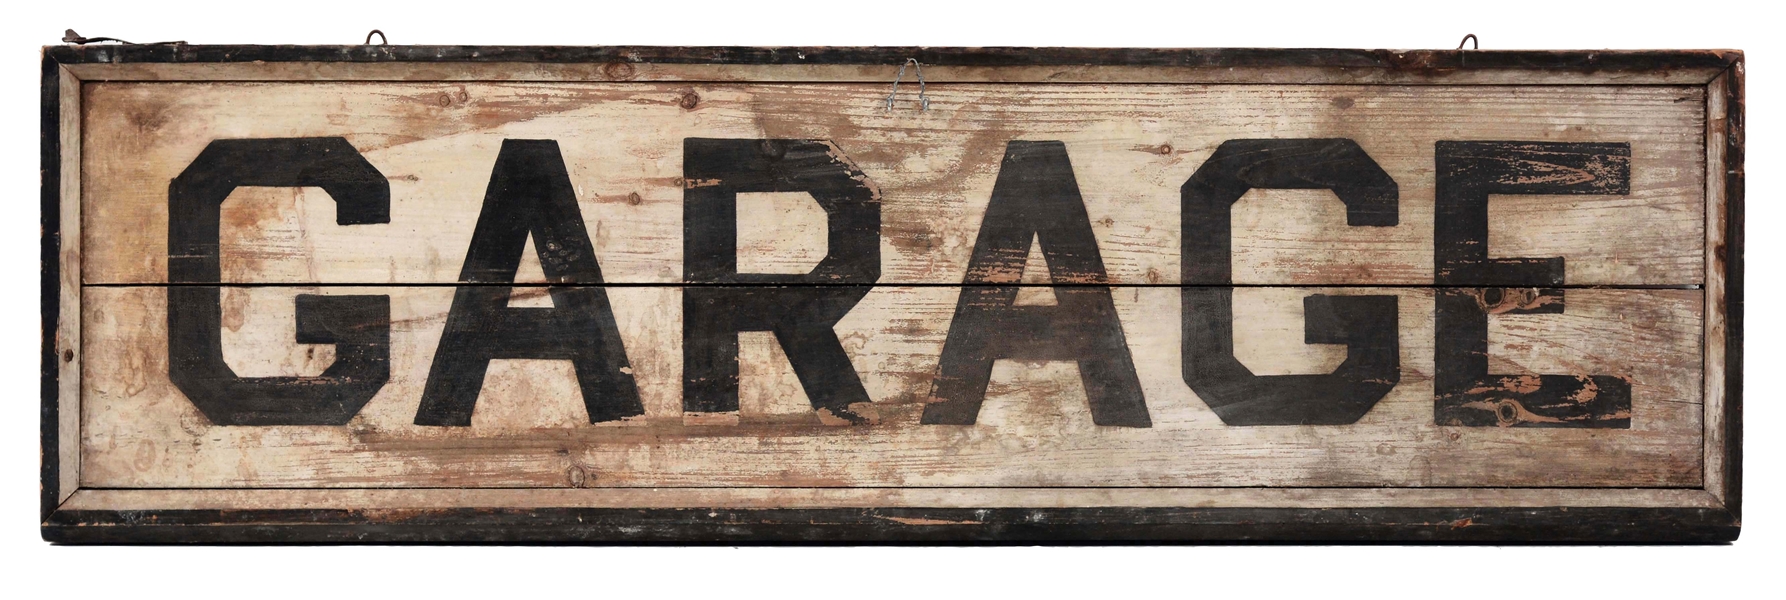 HAND PAINTED WOODEN GARAGE SIGN WITH WOOD FRAMING.